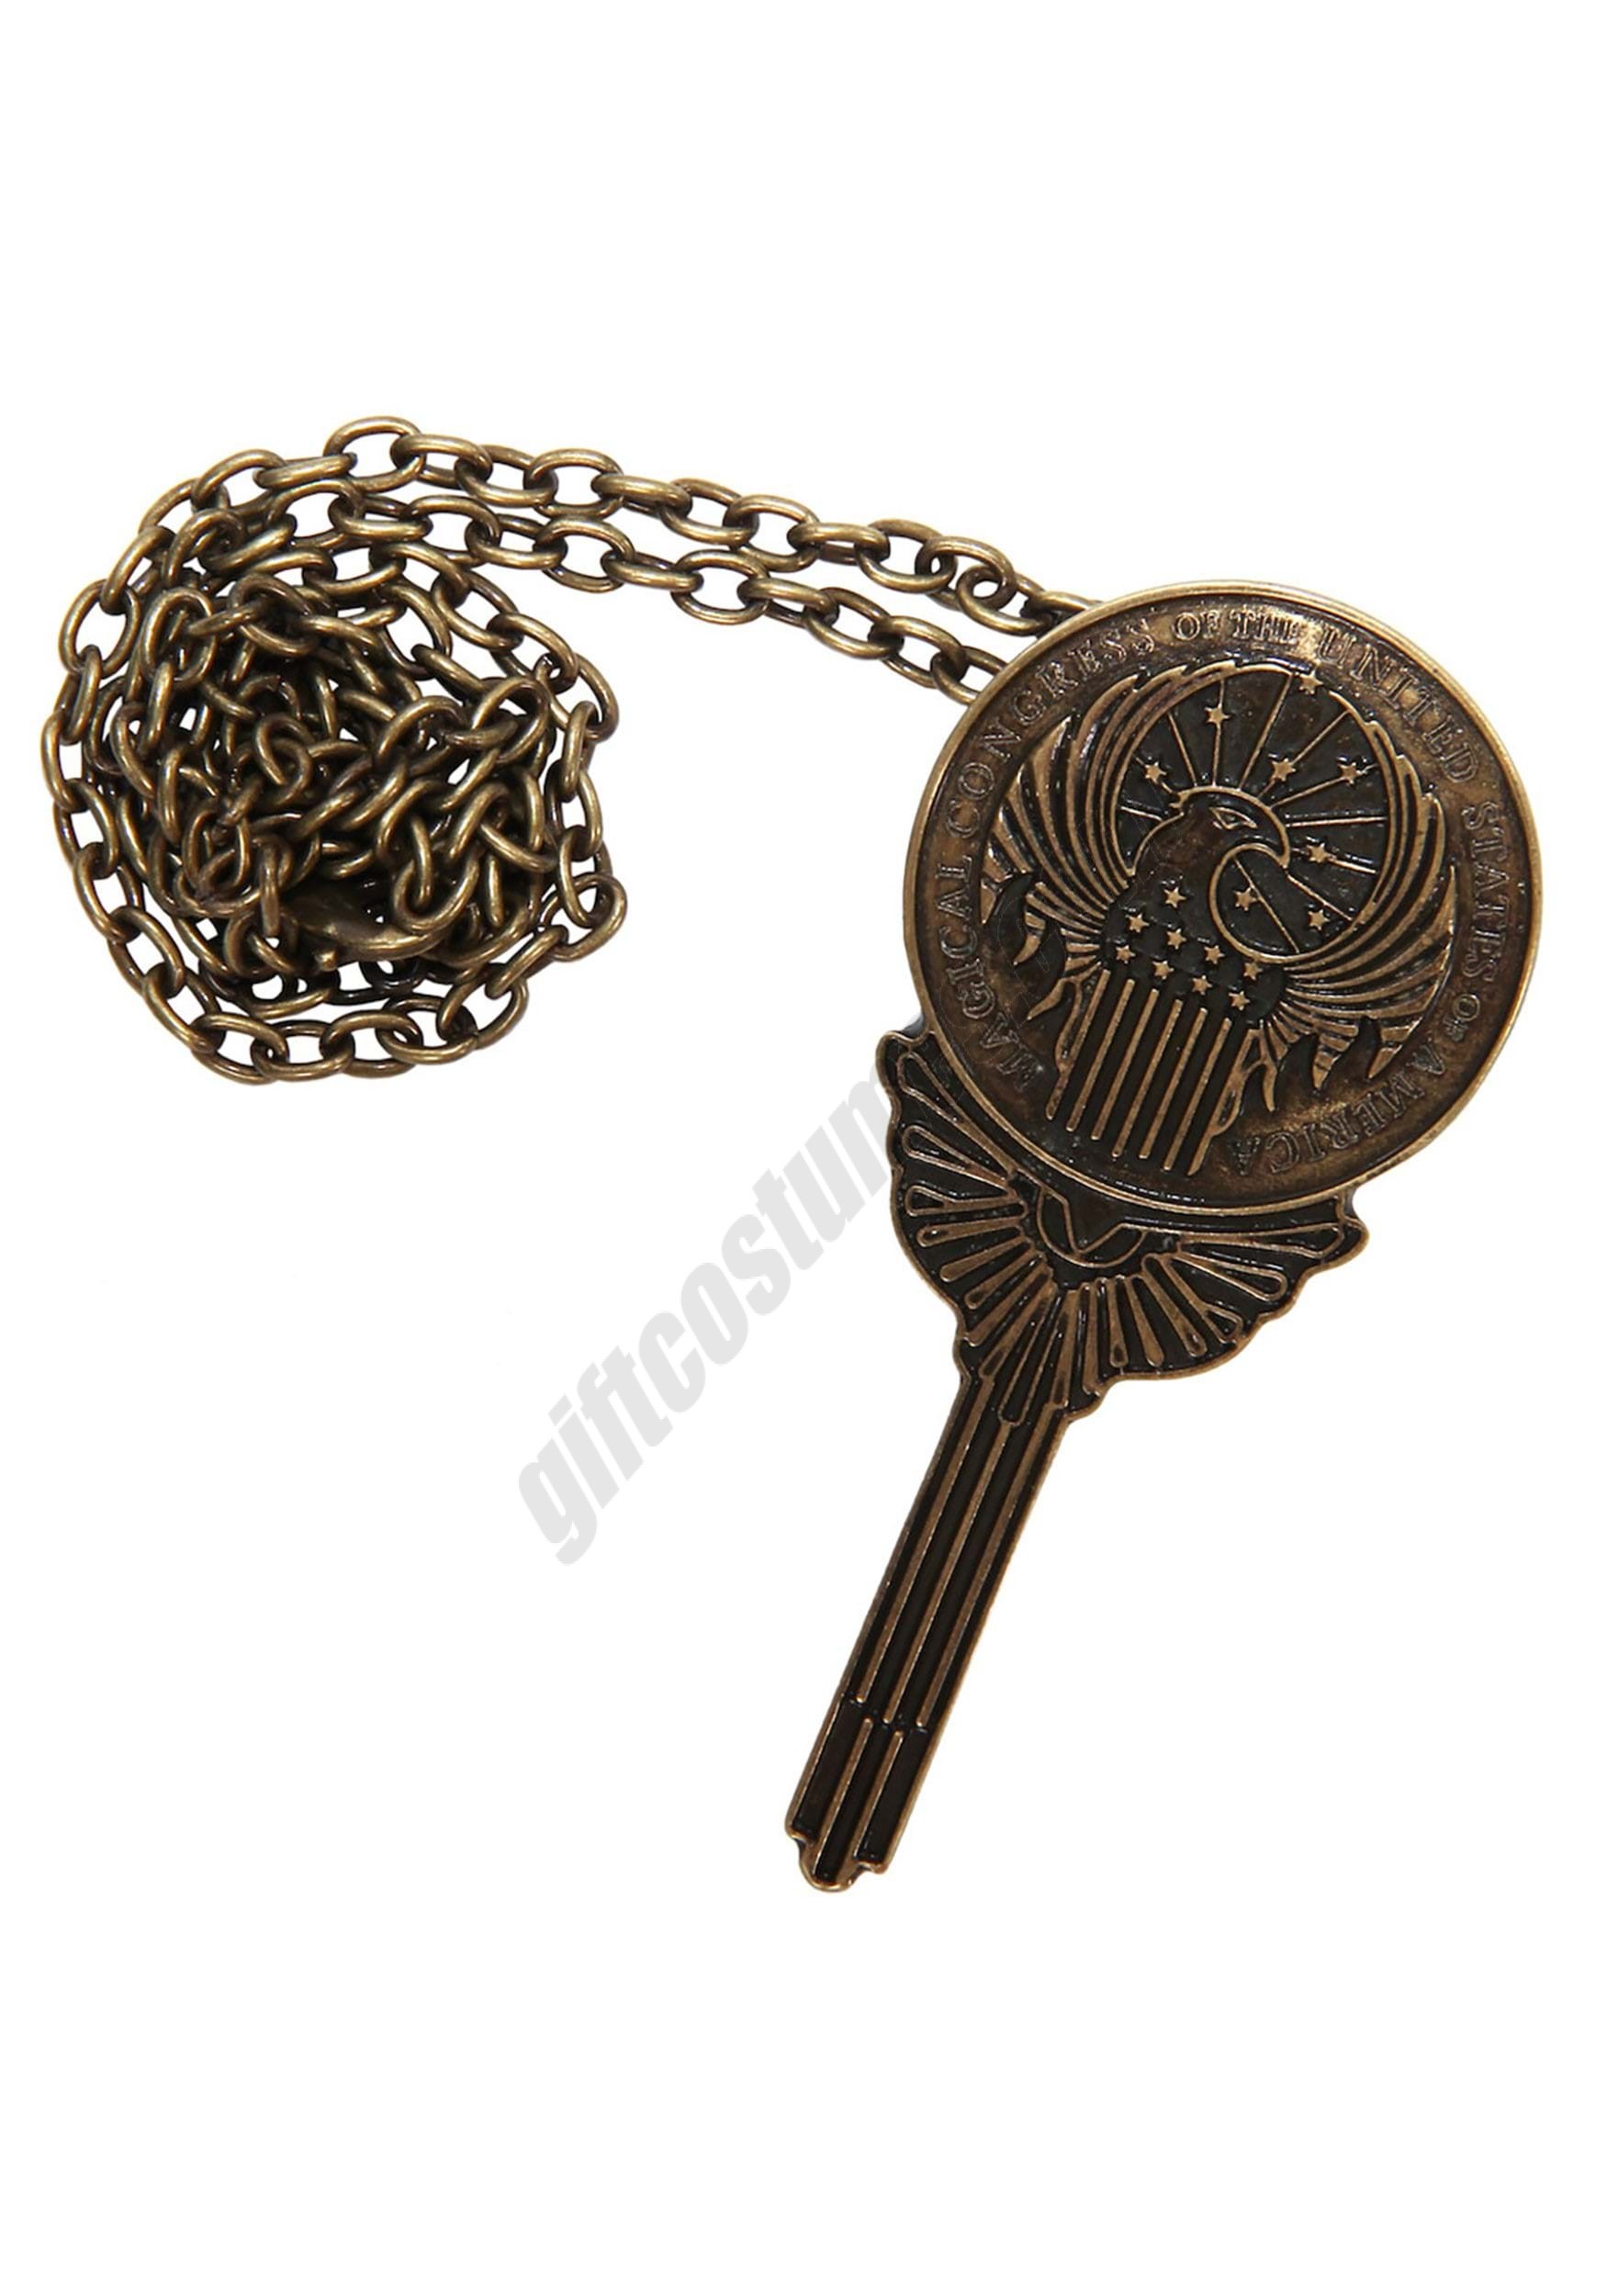 Harry Potter | MACUSA Pendant Pin Promotions - Harry Potter | MACUSA Pendant Pin Promotions